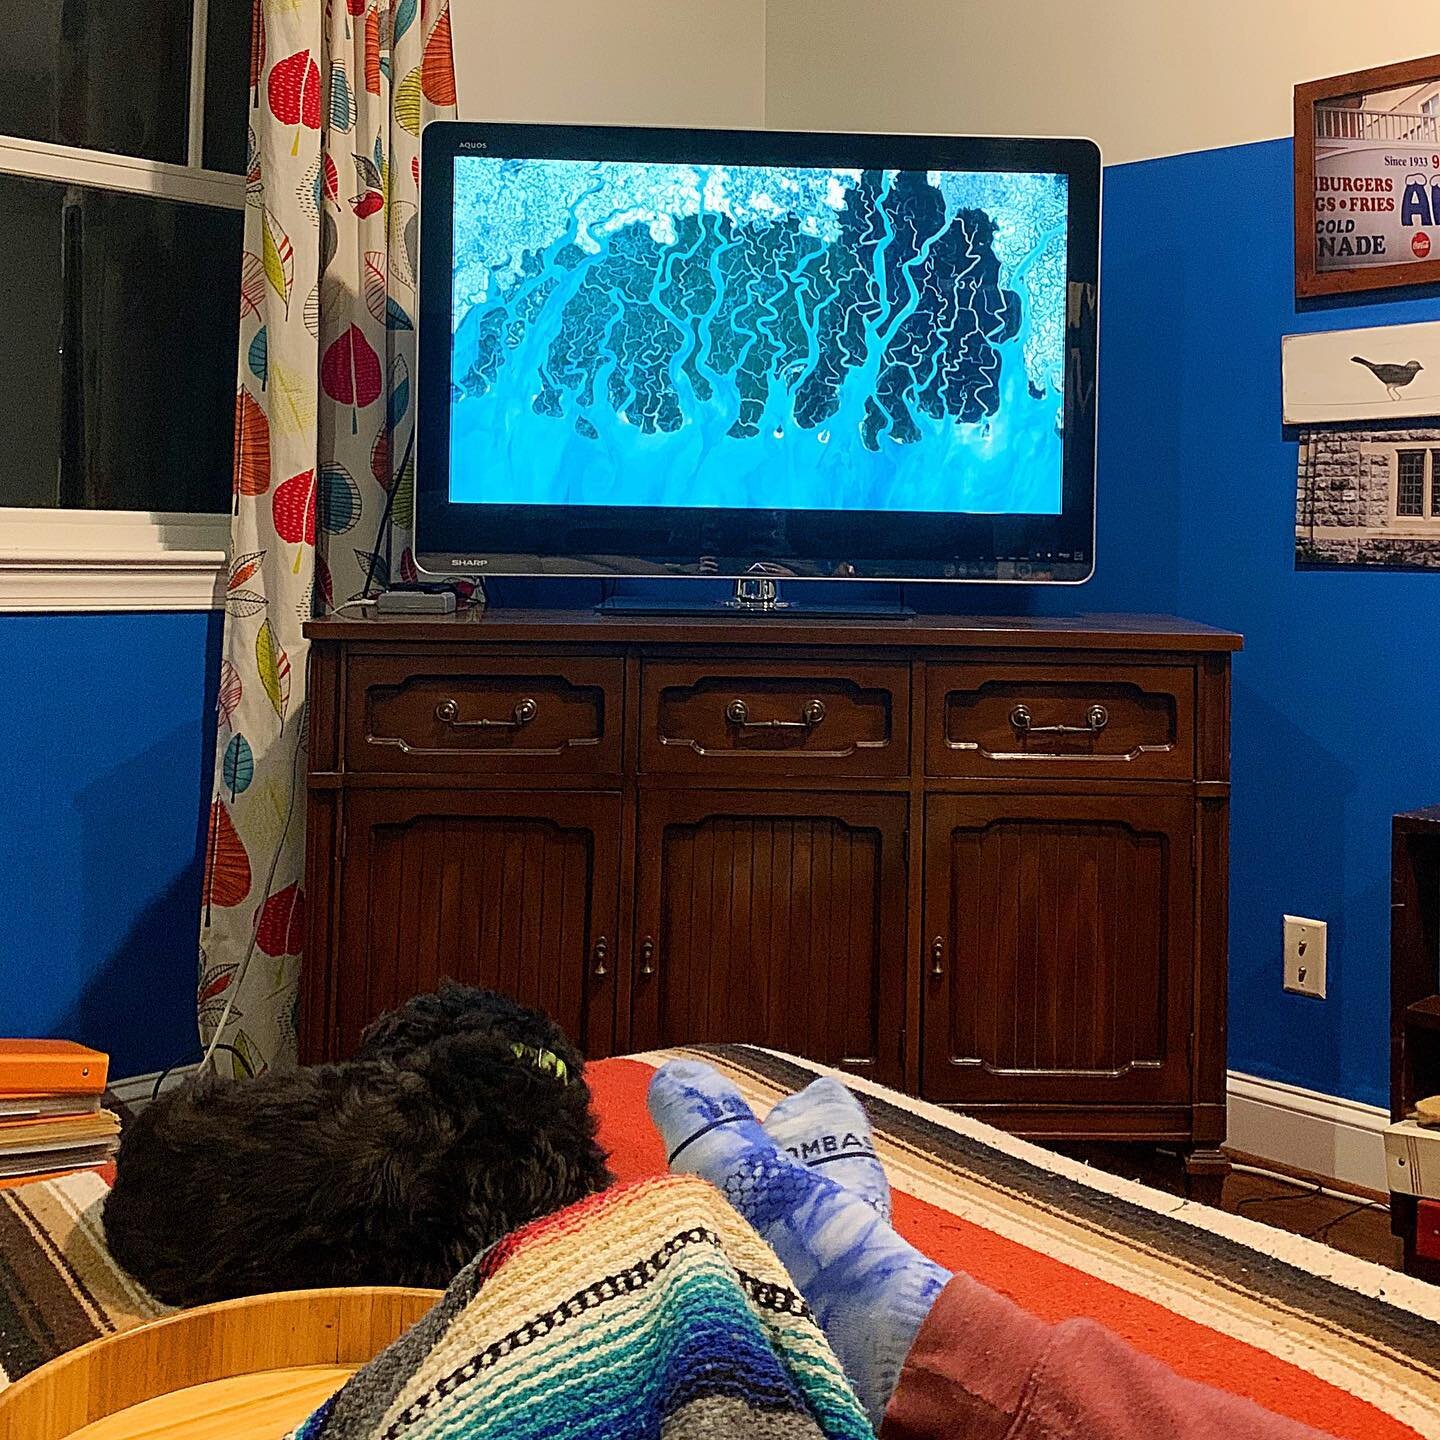 Finally getting a chance to watch Life from Above (streaming on PBS) with Kyle. Simply stunning cinematography. Brings back memories of watching Blue Planet together when the boys were younger.

In the Homeschool Alliance we&rsquo;ve been talking abo